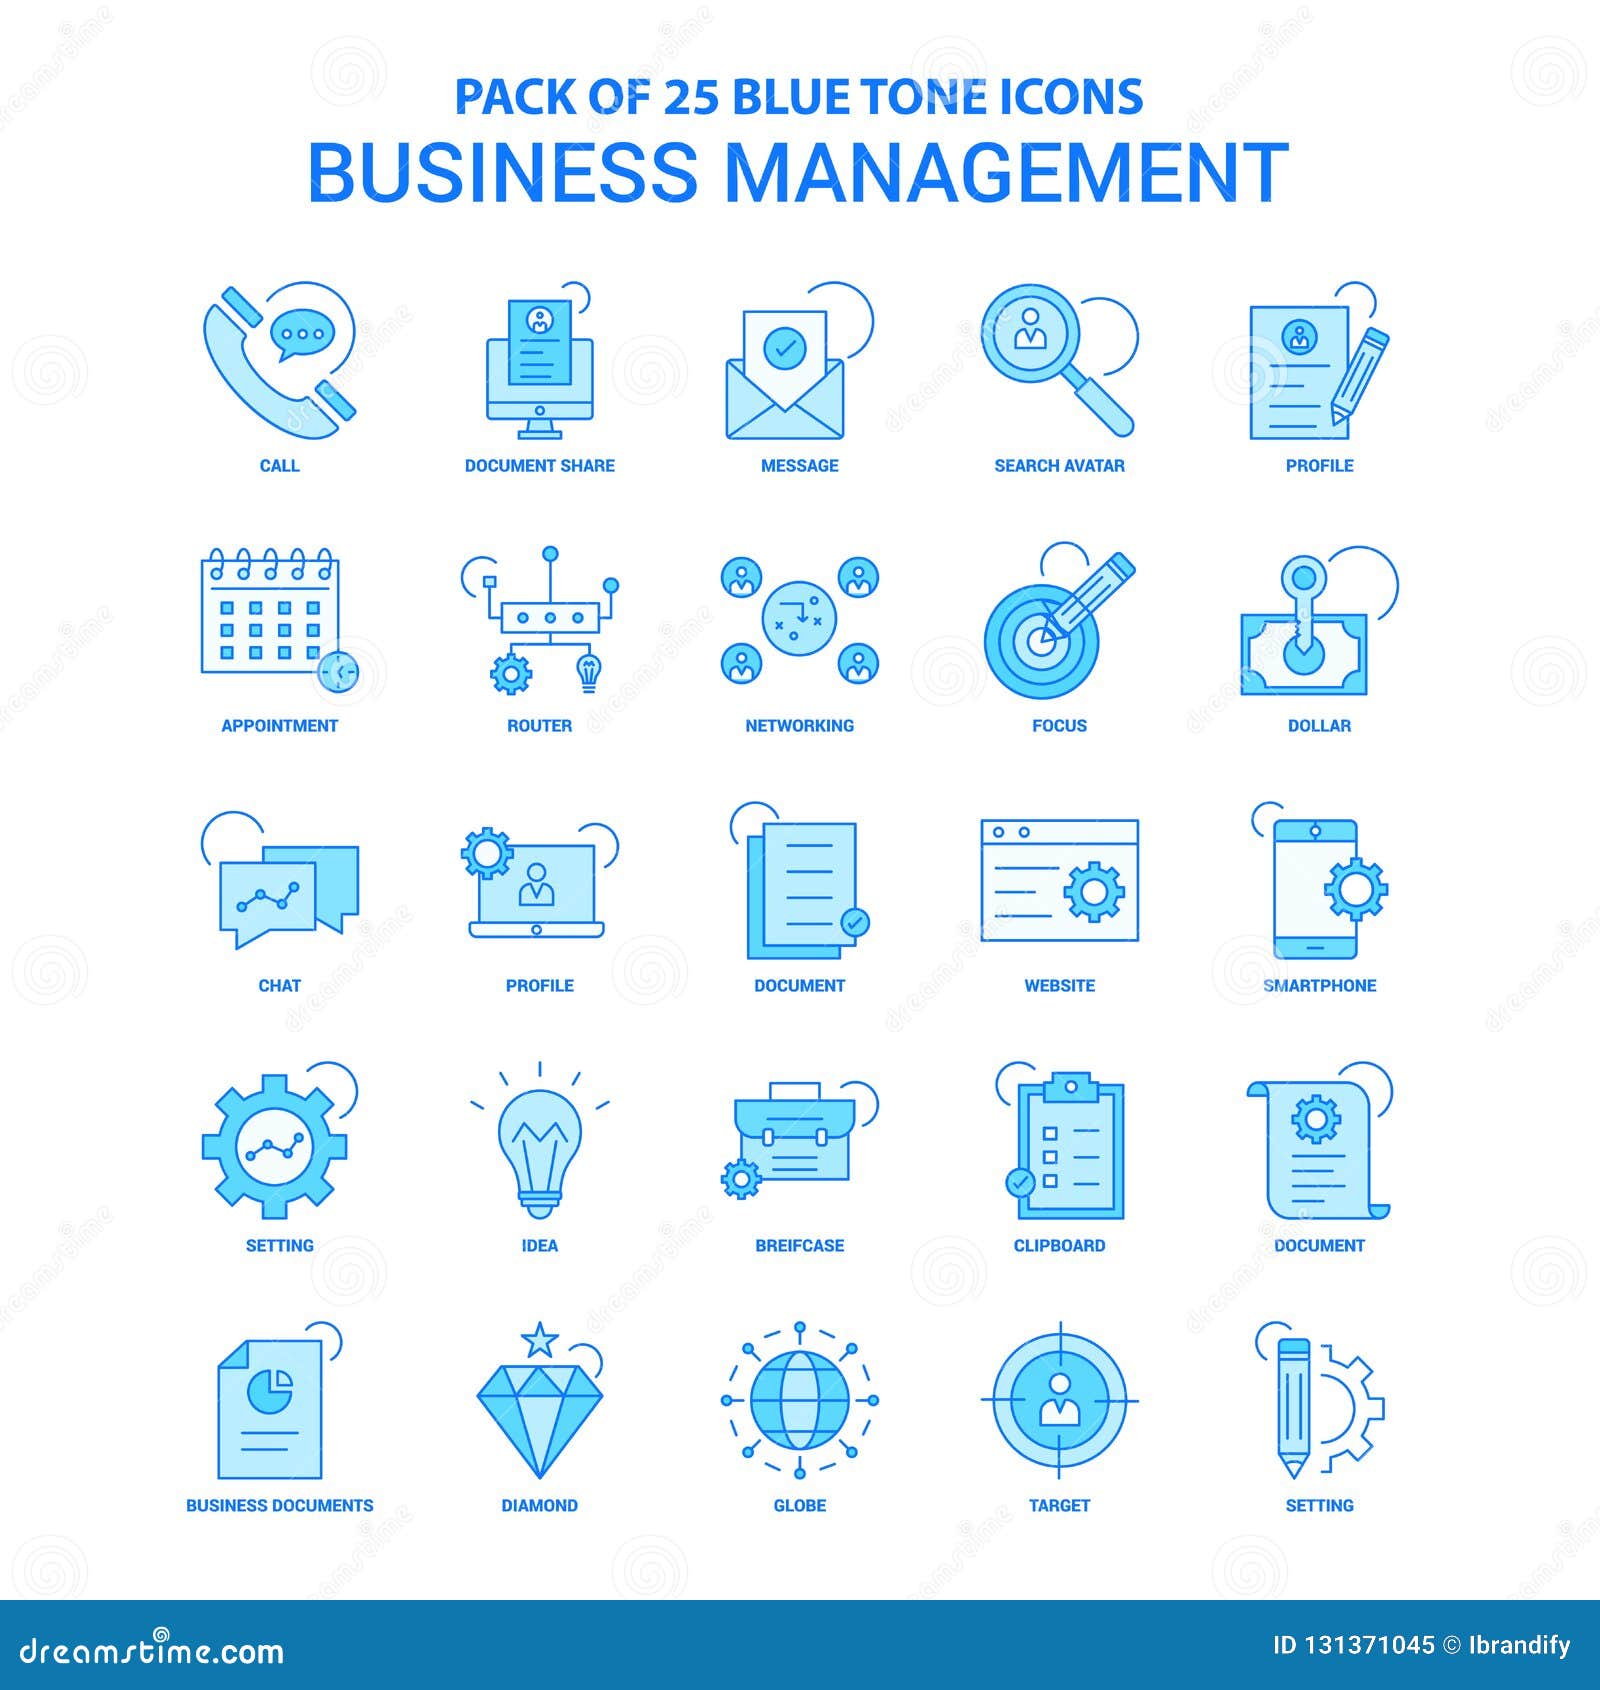 business management blue tone icon pack - 25 icon sets